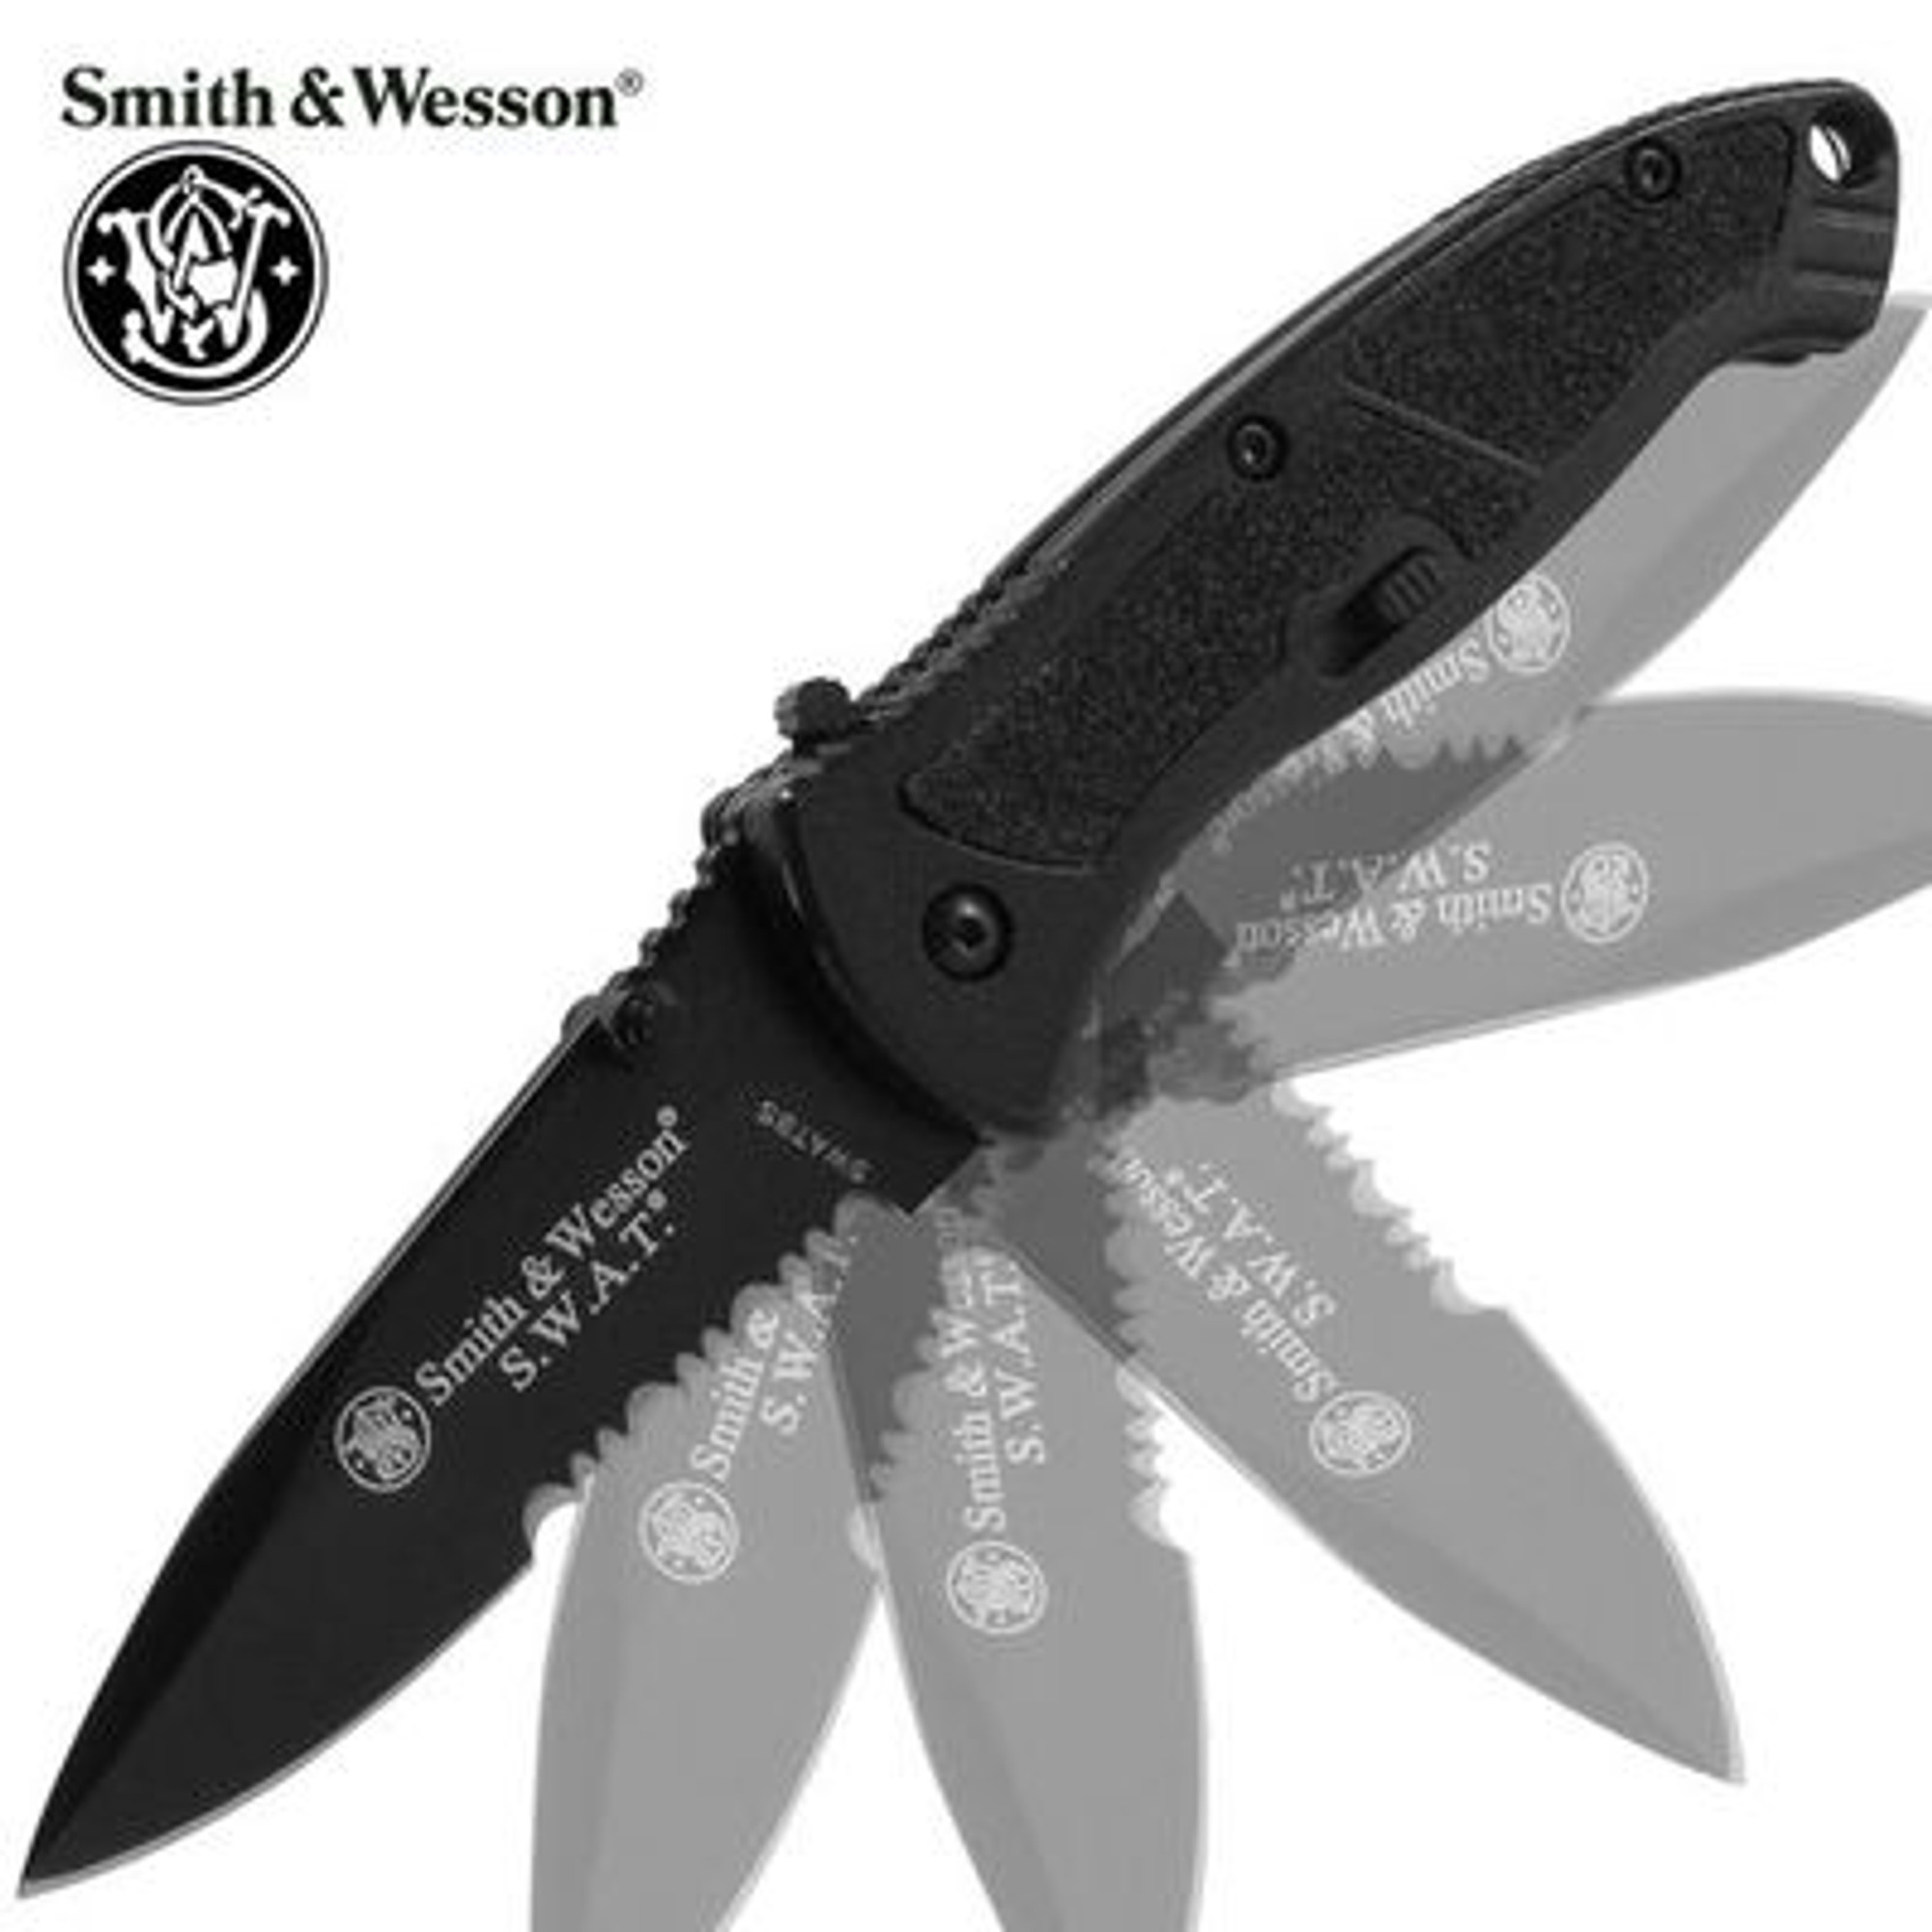 Smith & Wesson SWAT Assisted Opening Pocket Knife - Small Serrated